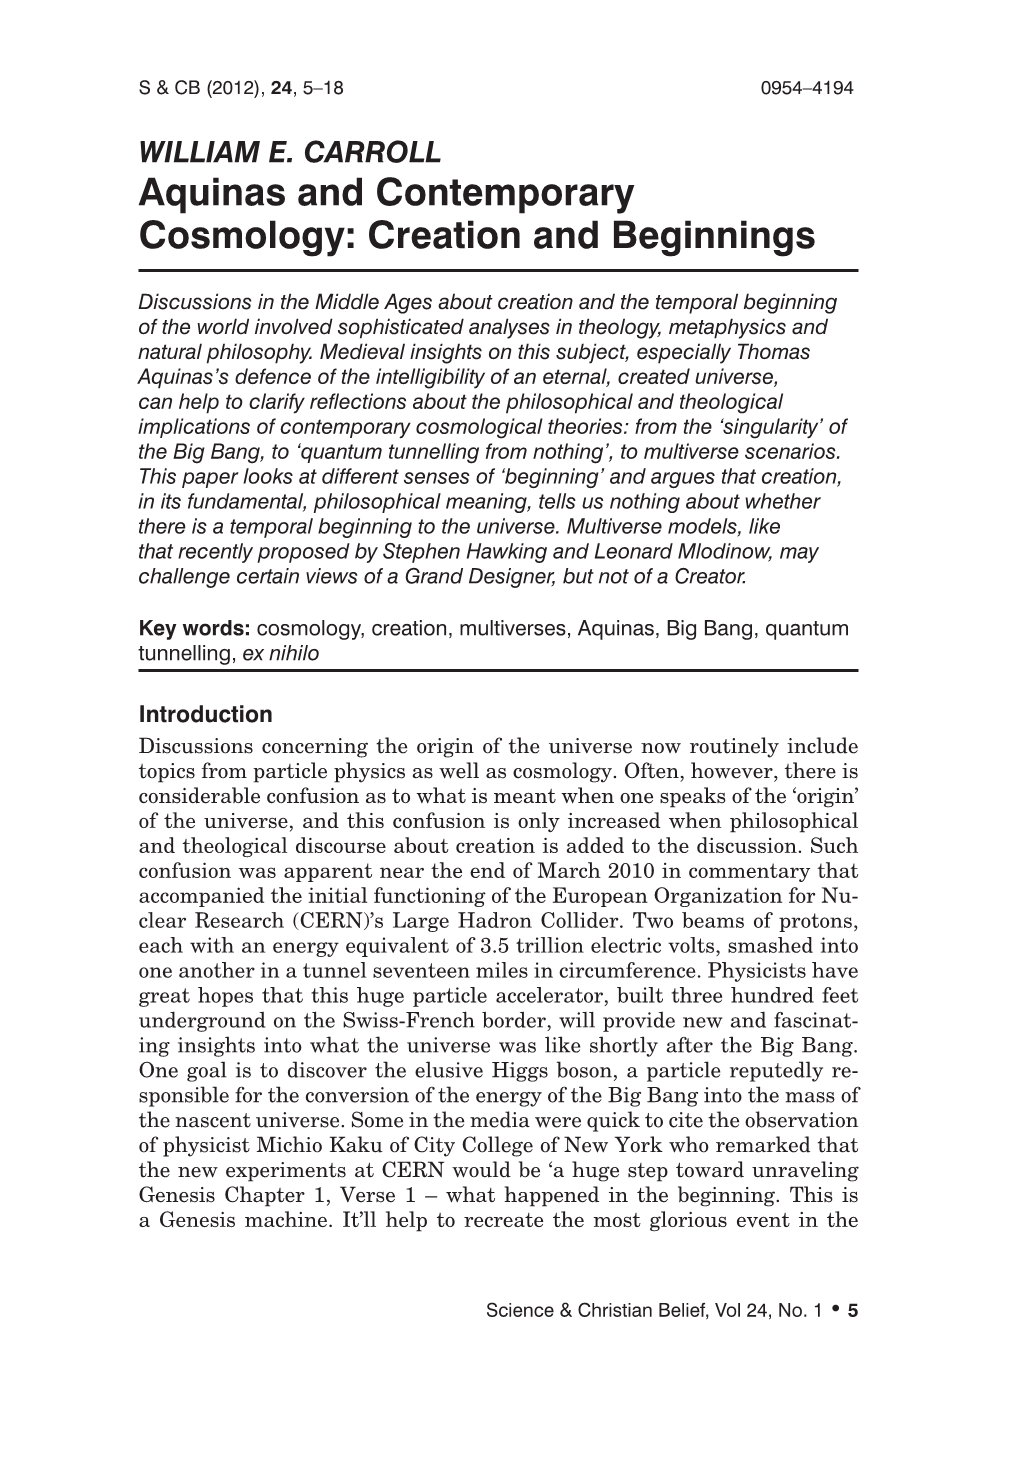 Aquinas and Contemporary Cosmology: Creation and Beginnings